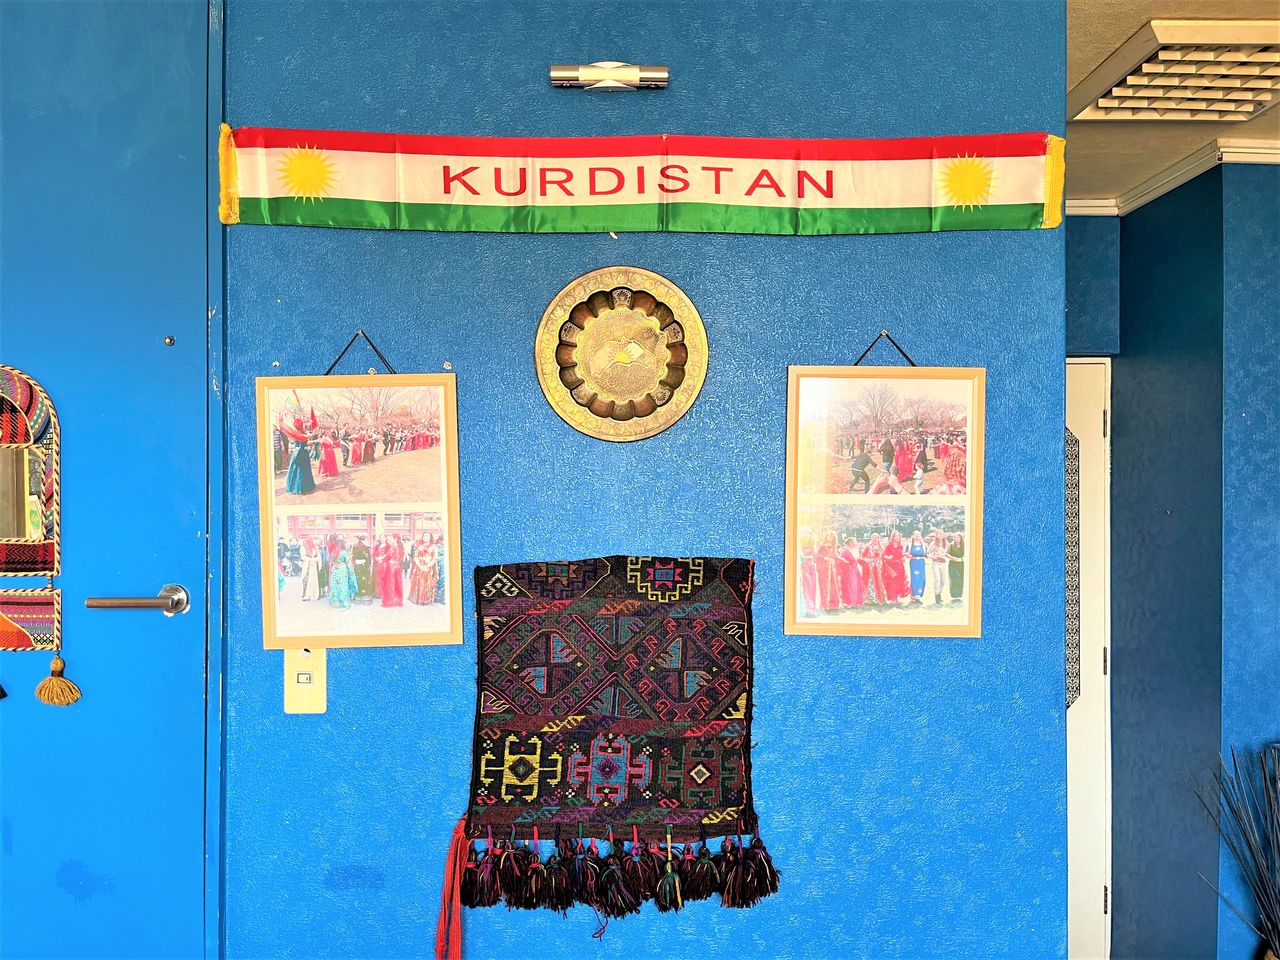 The restaurant also has Kurdish culture displays. The flag of red, green and white stripes overlaid with a sunburst is that of Kurdistan.